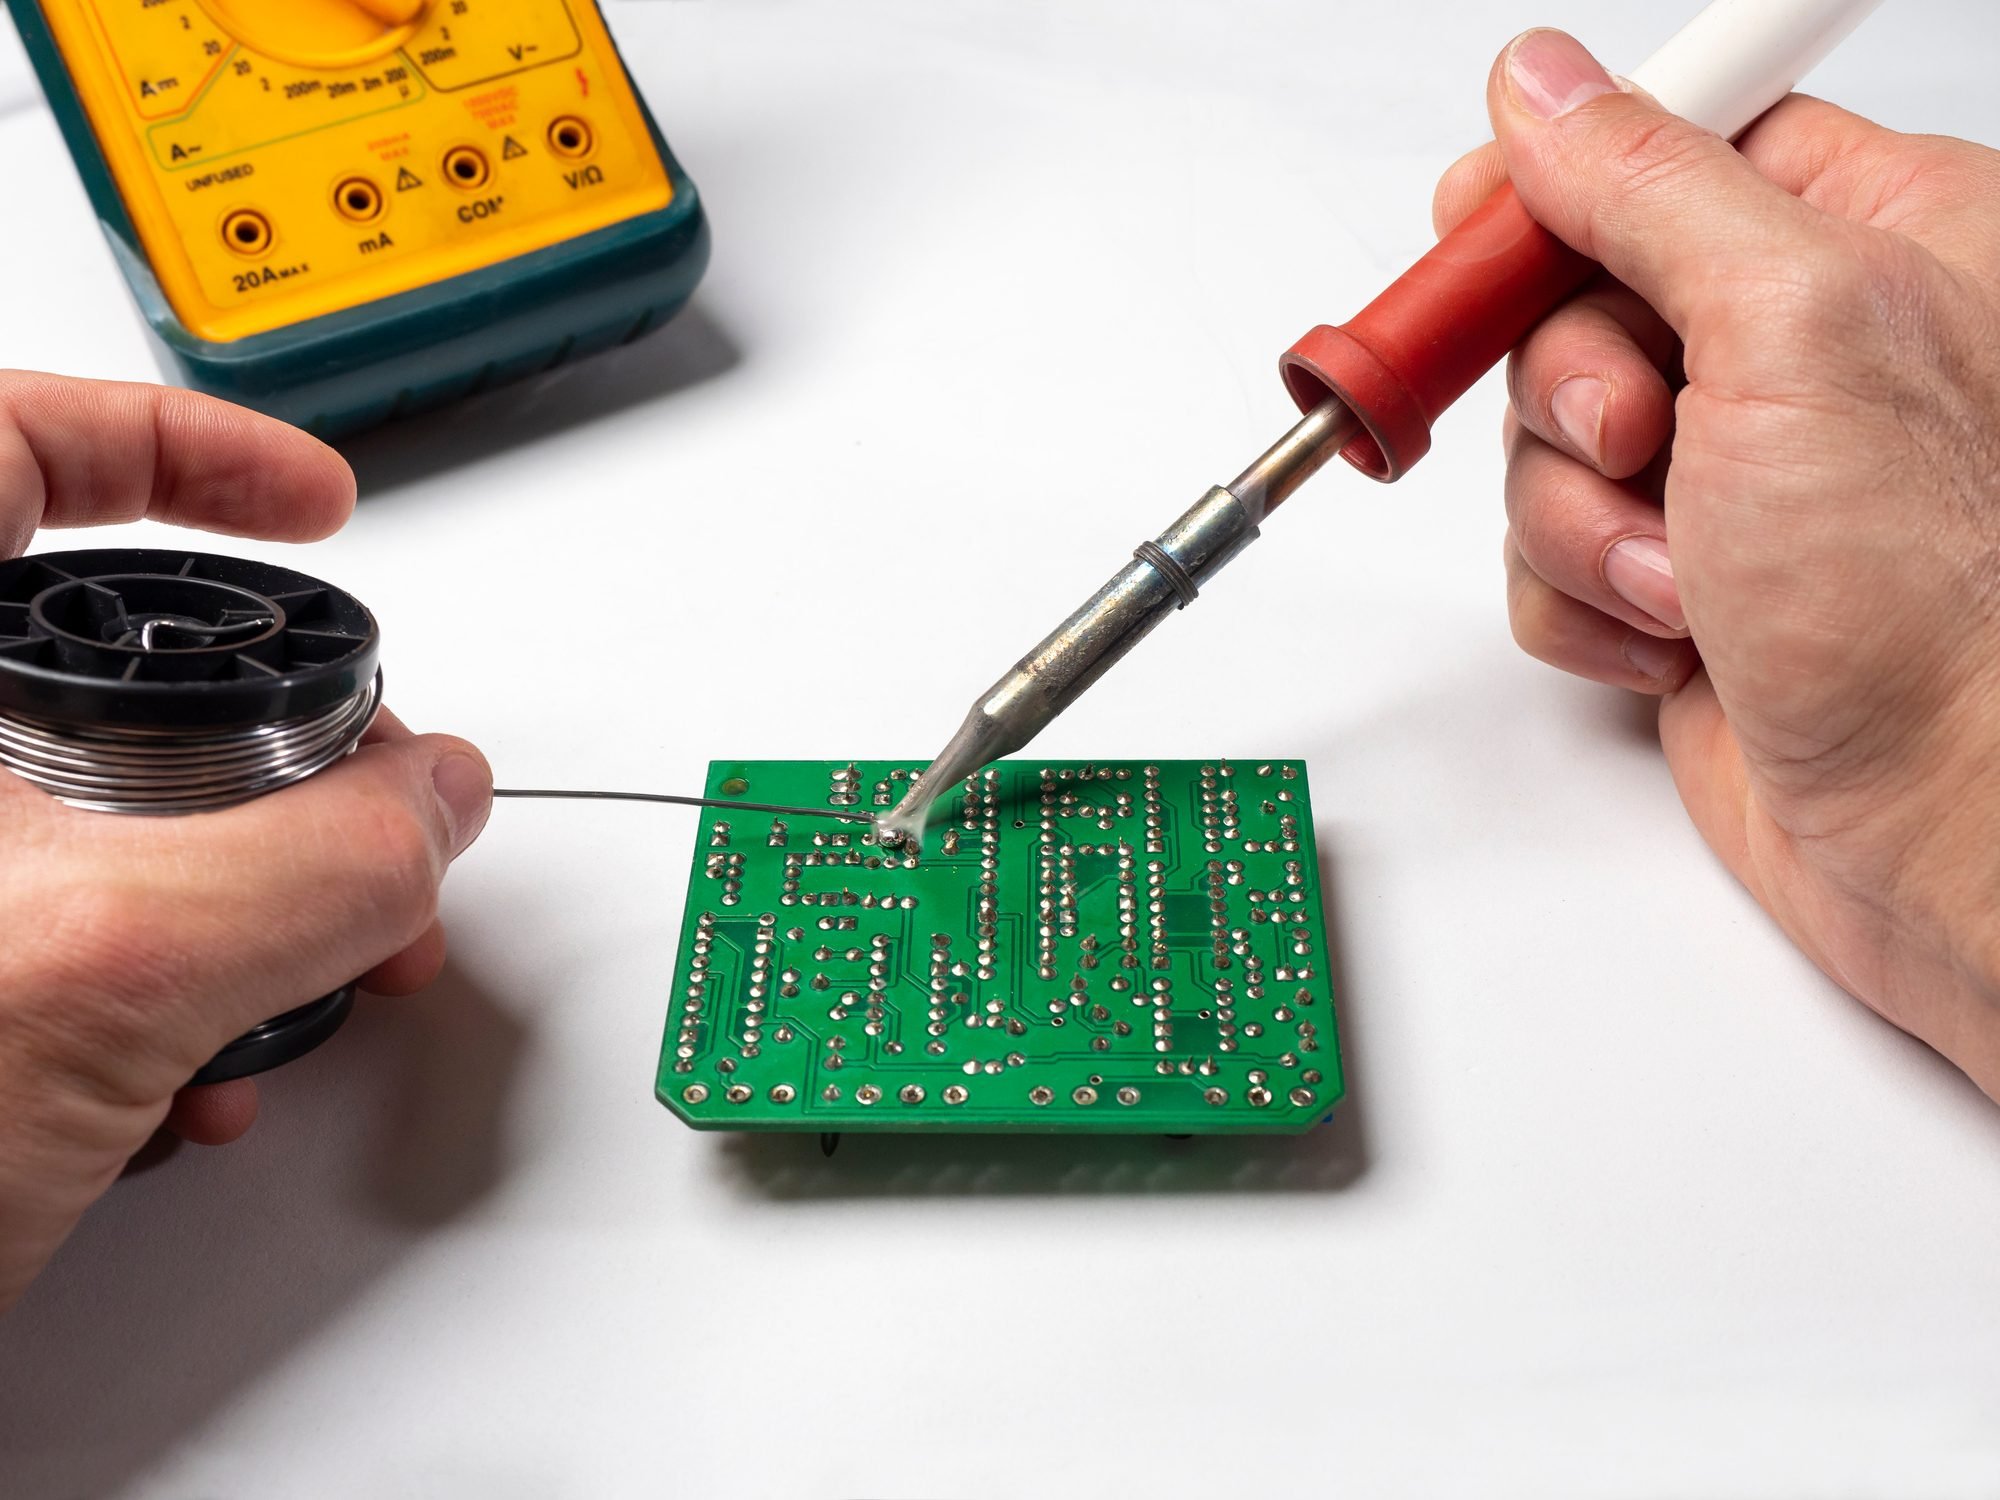 A Guide for Soldering Electronics